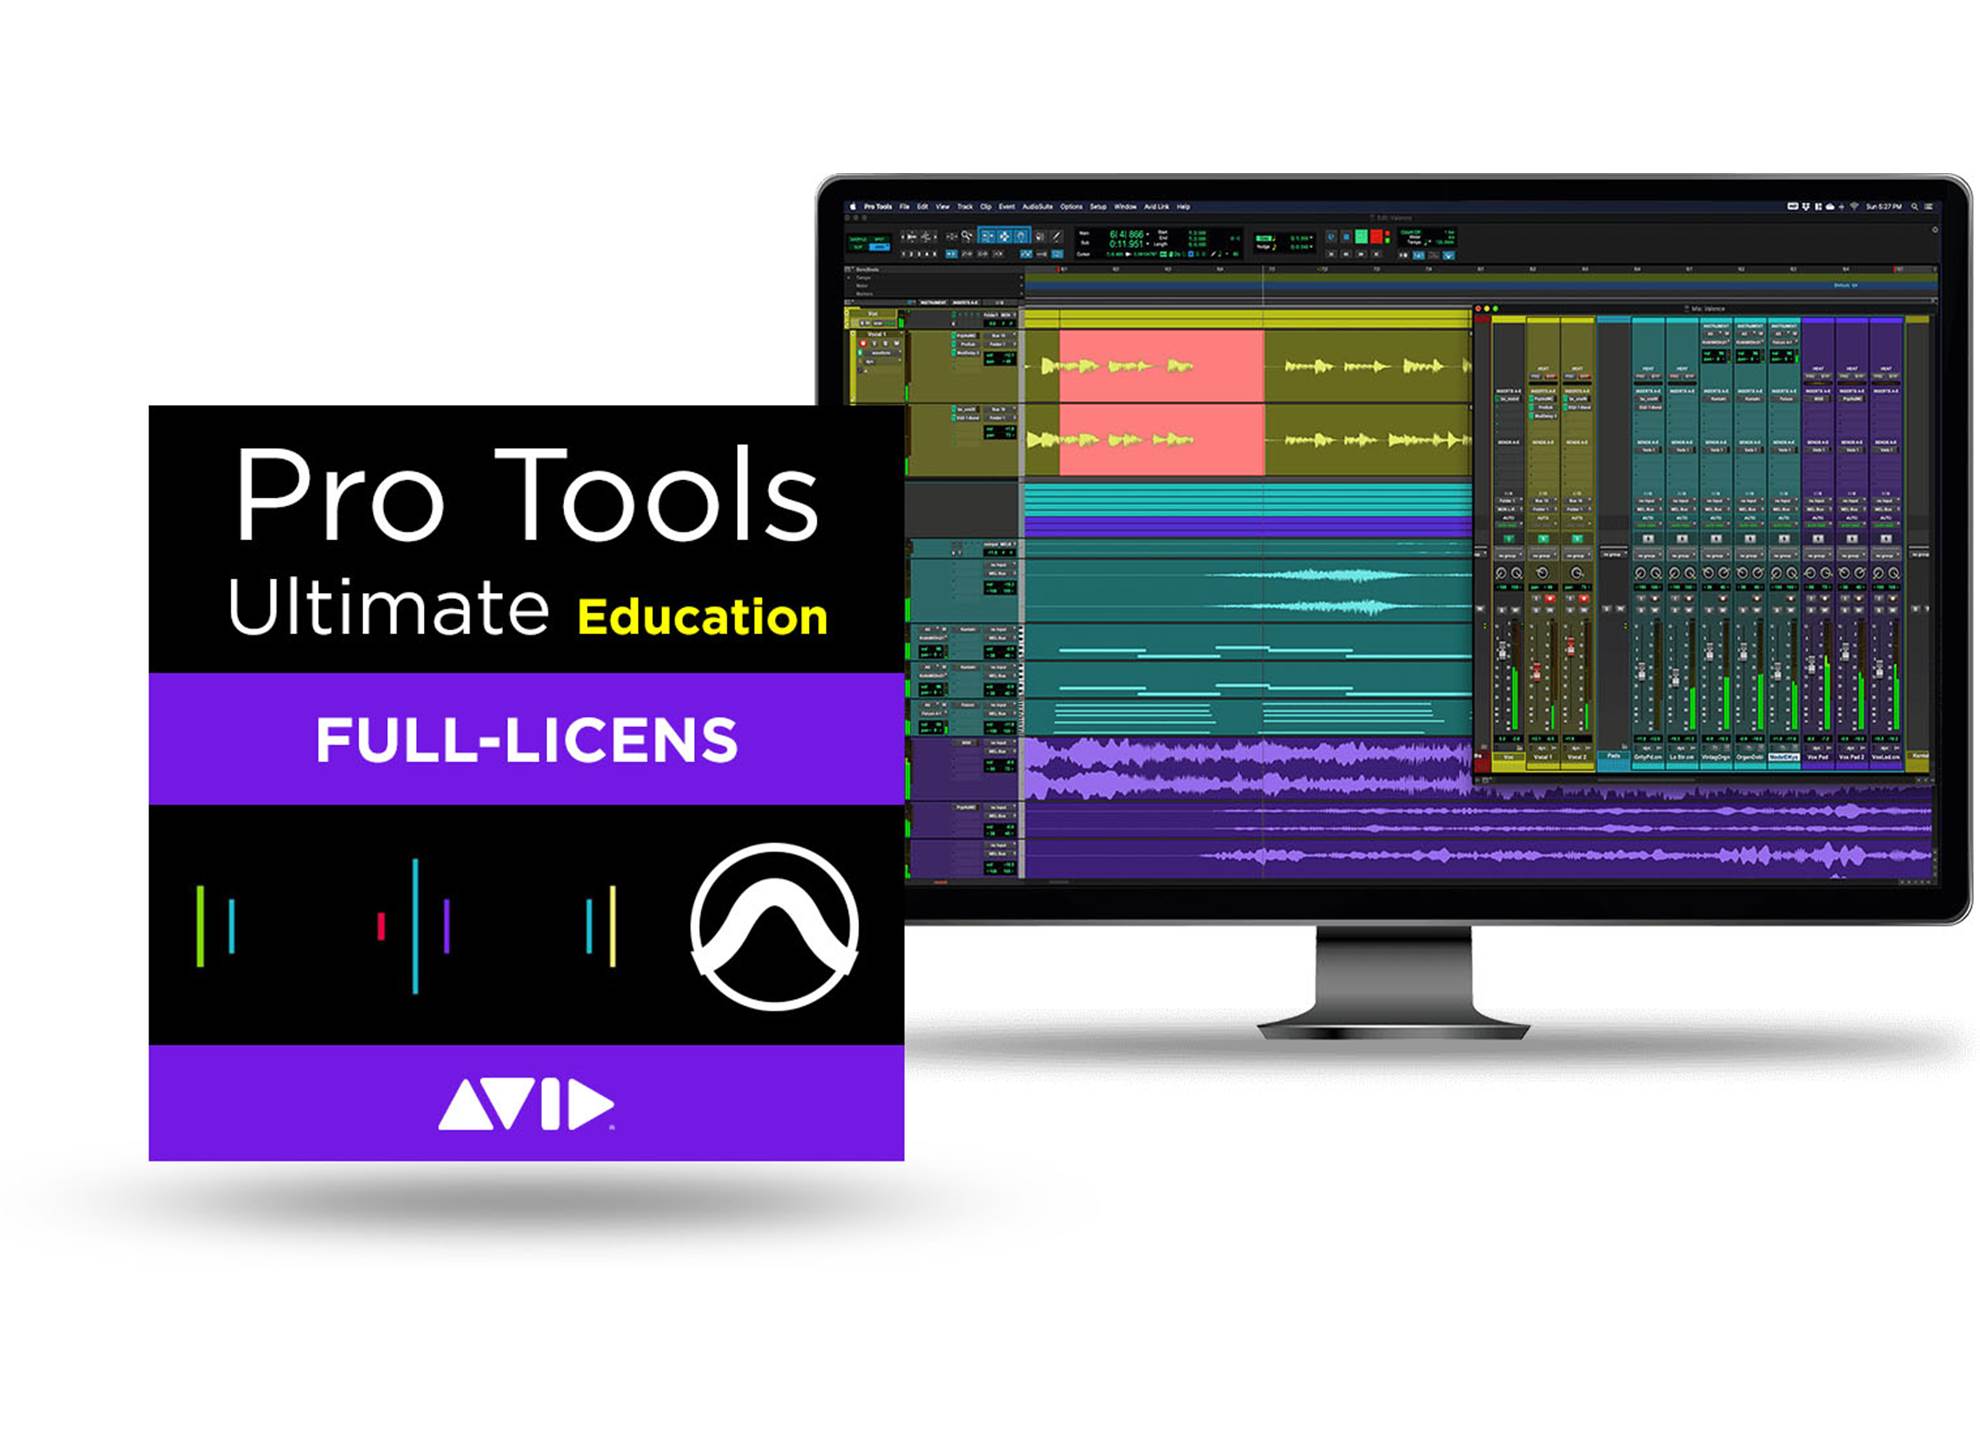 pro tools ultimate subscription